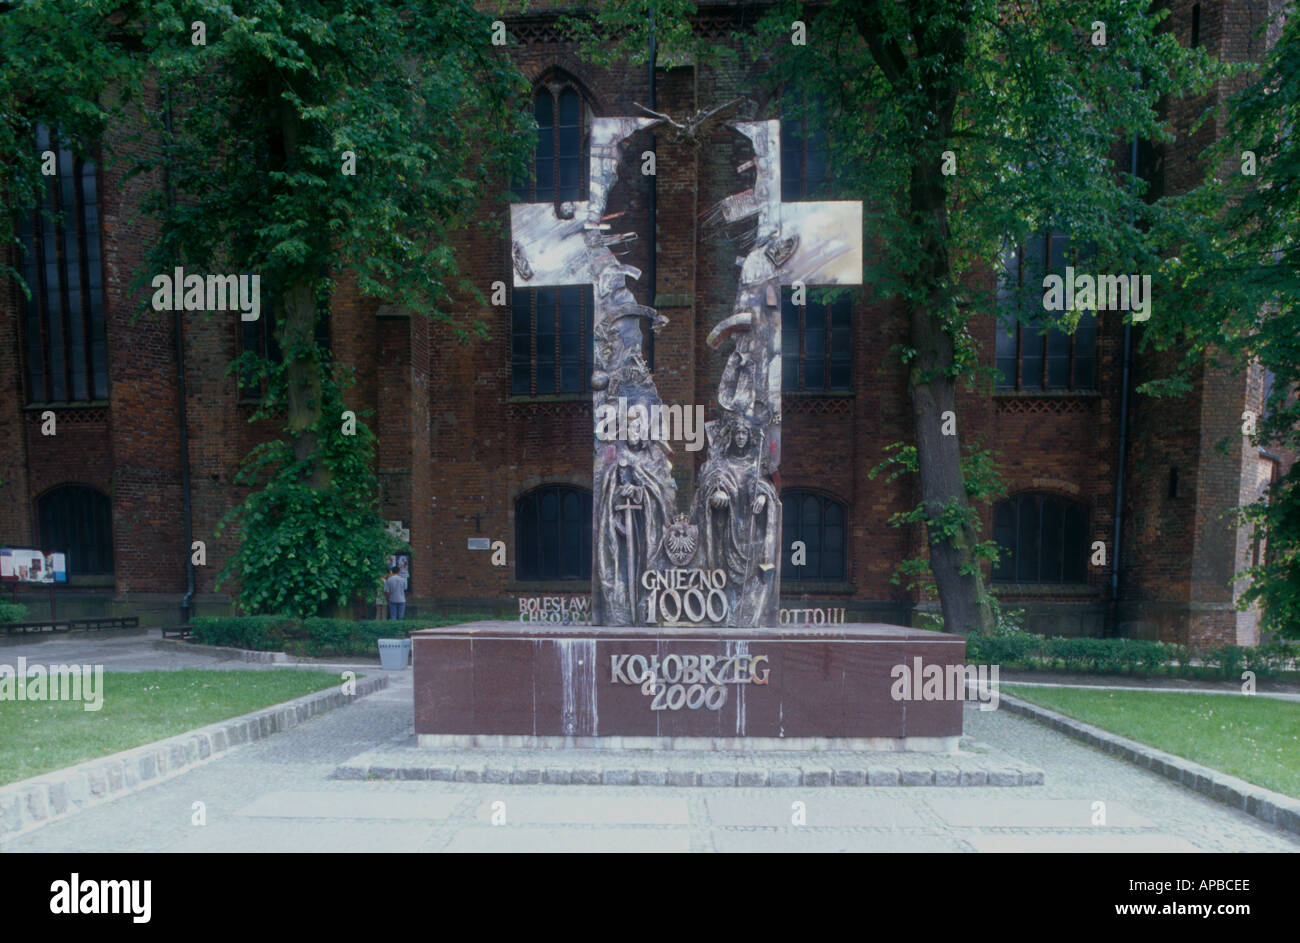 thousand year festival steel crucifix sculpture in front of th Maria cathedral Kolobrzeg Pommern Poland  Stock Photo